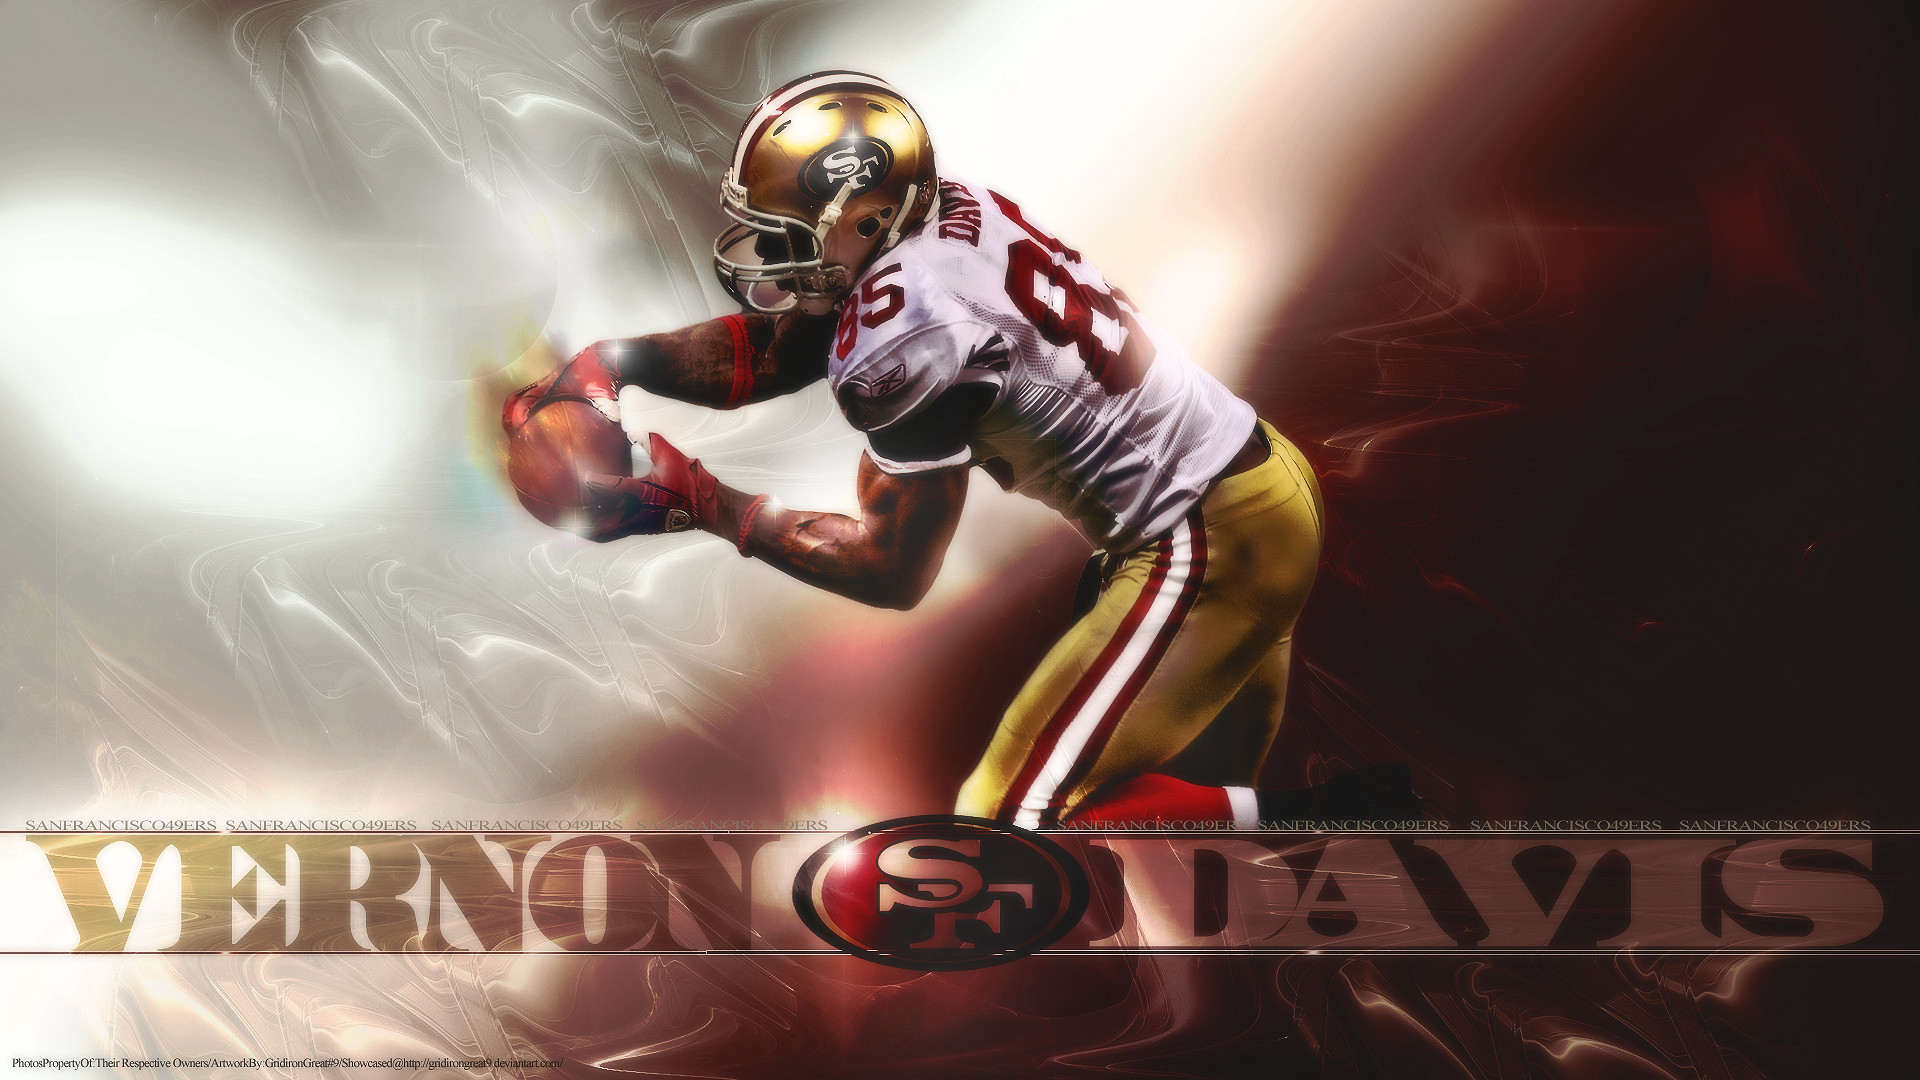 Also, gridirongreat on footballs future has a gallery of wallpapers here offset0